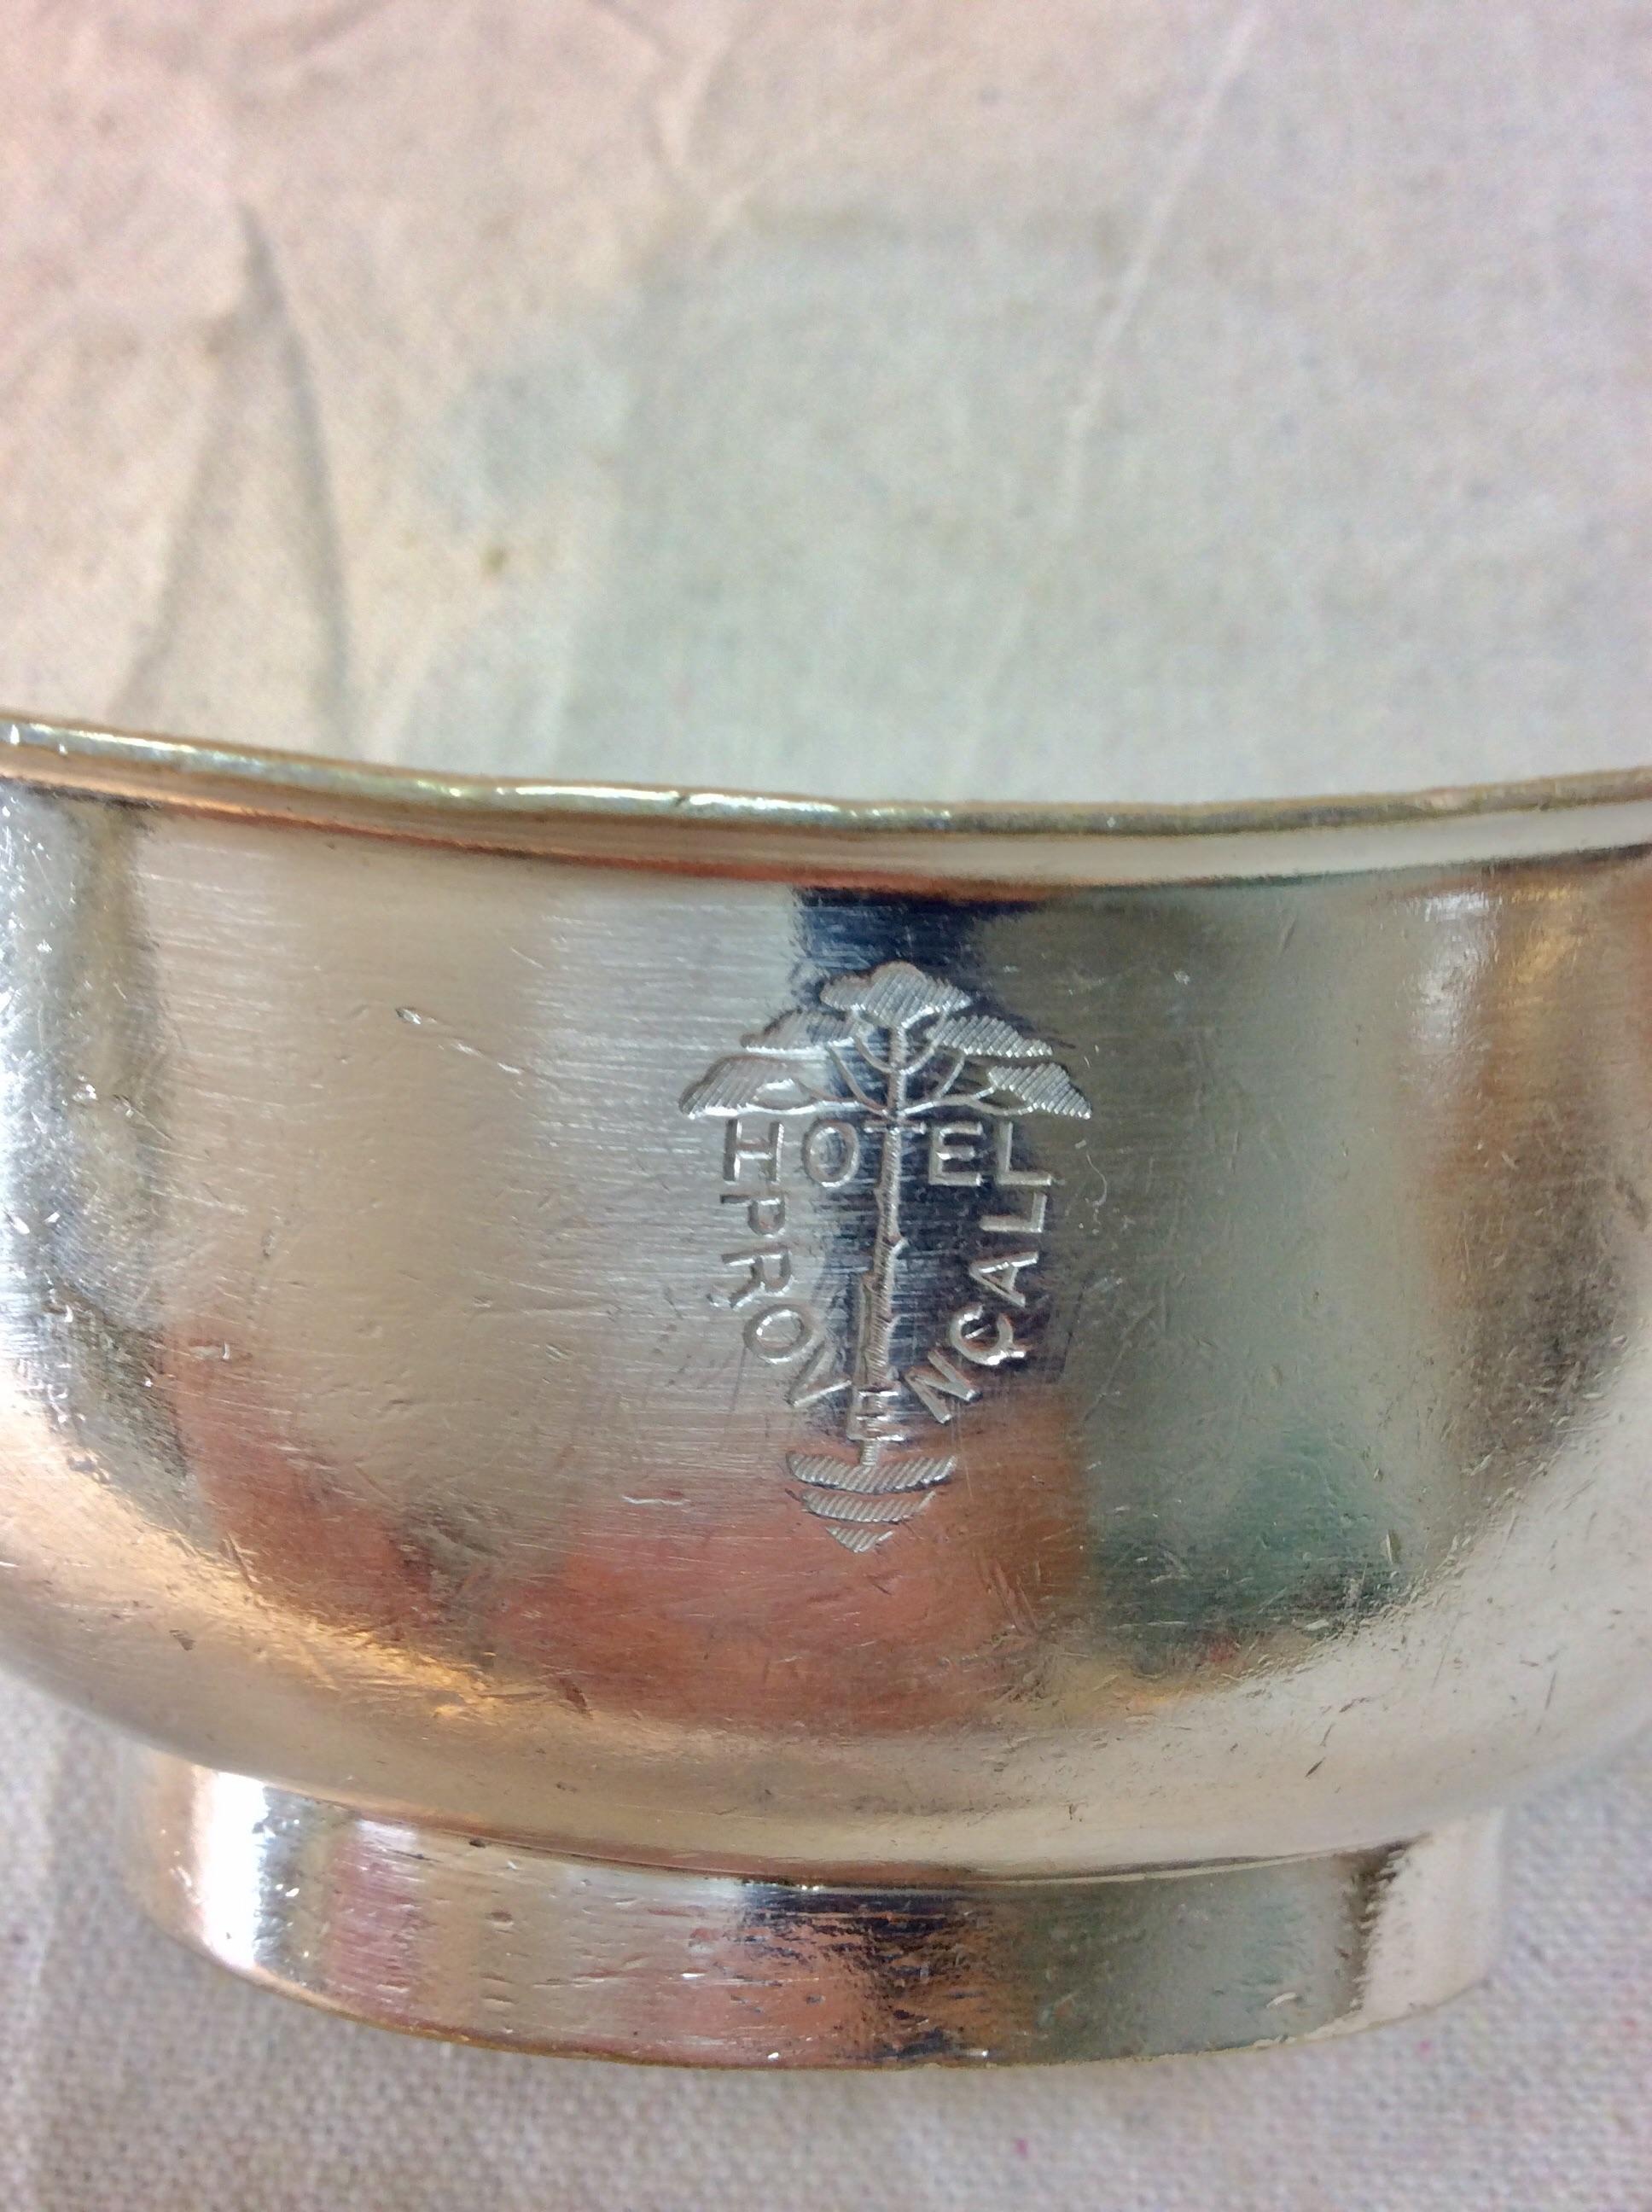 20th Century French Christofle Hotel Silver Silverplate Hotel Provencal Sauce Bo For Sale 1